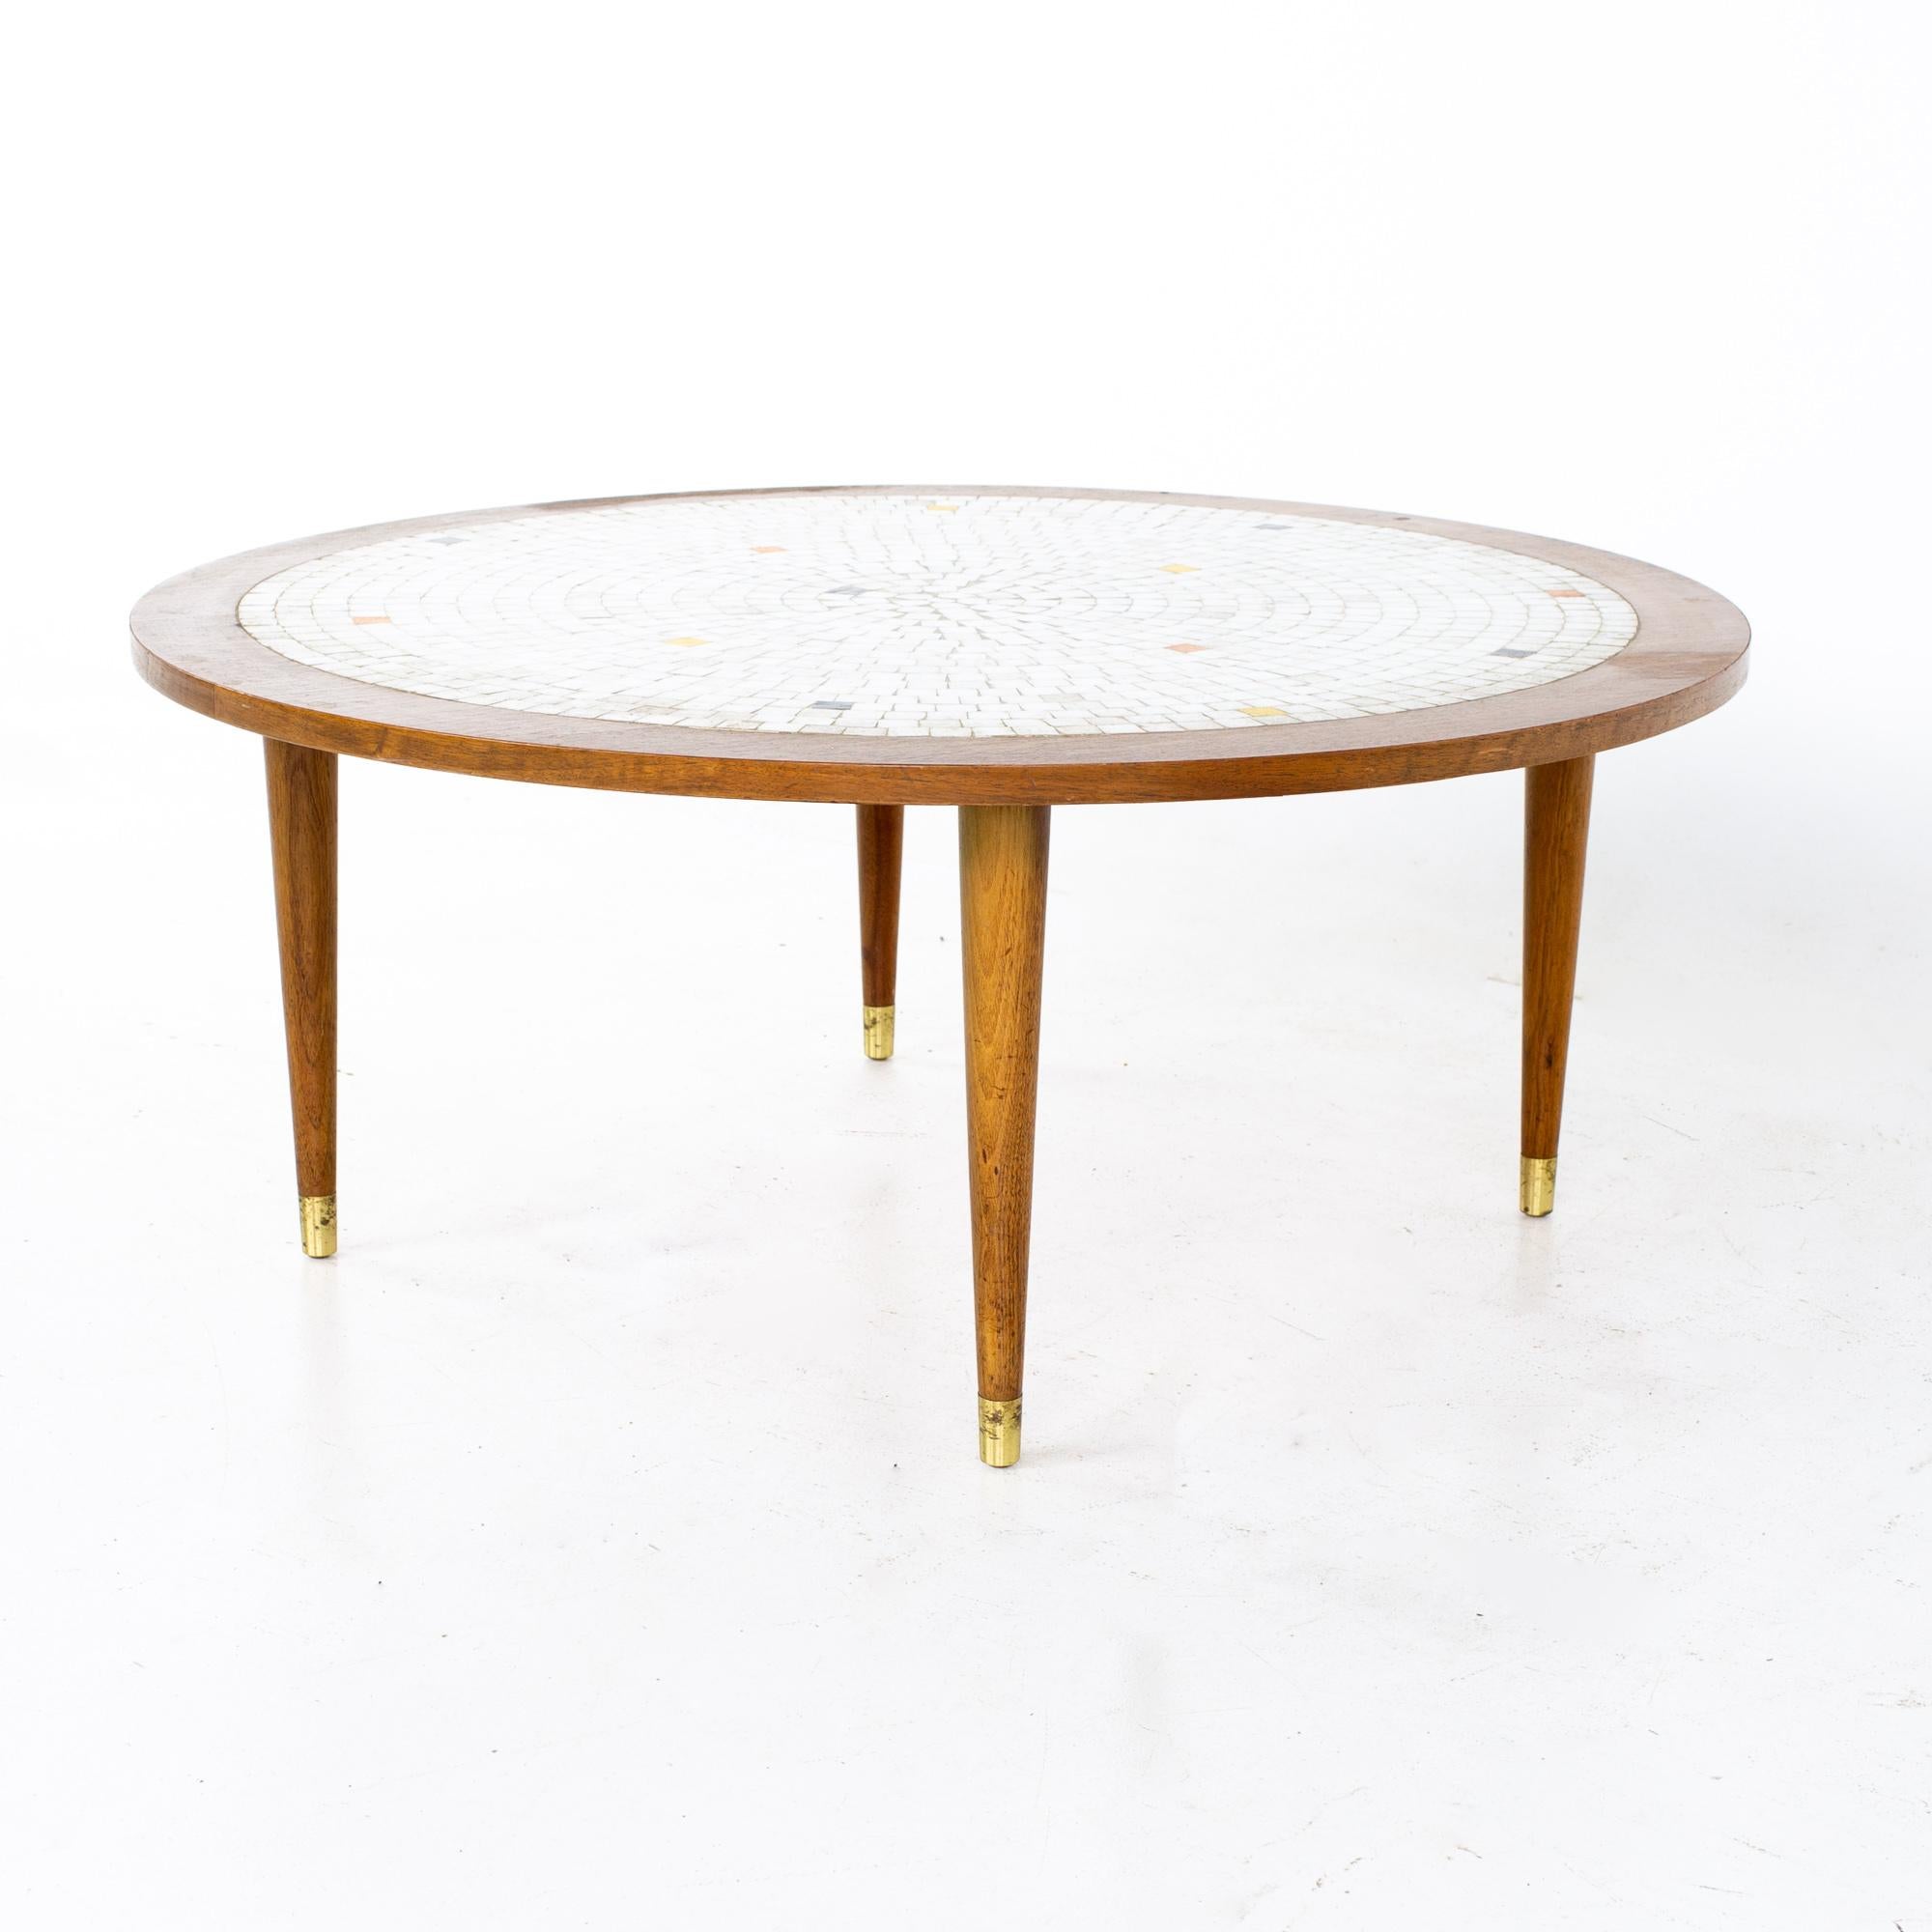 Martz style mid century round walnut mosaic coffee table
Coffee table measures: 36 wide x 36 deep x 15 inches high

All pieces of furniture can be had in what we call restored vintage condition. That means the piece is restored upon purchase so